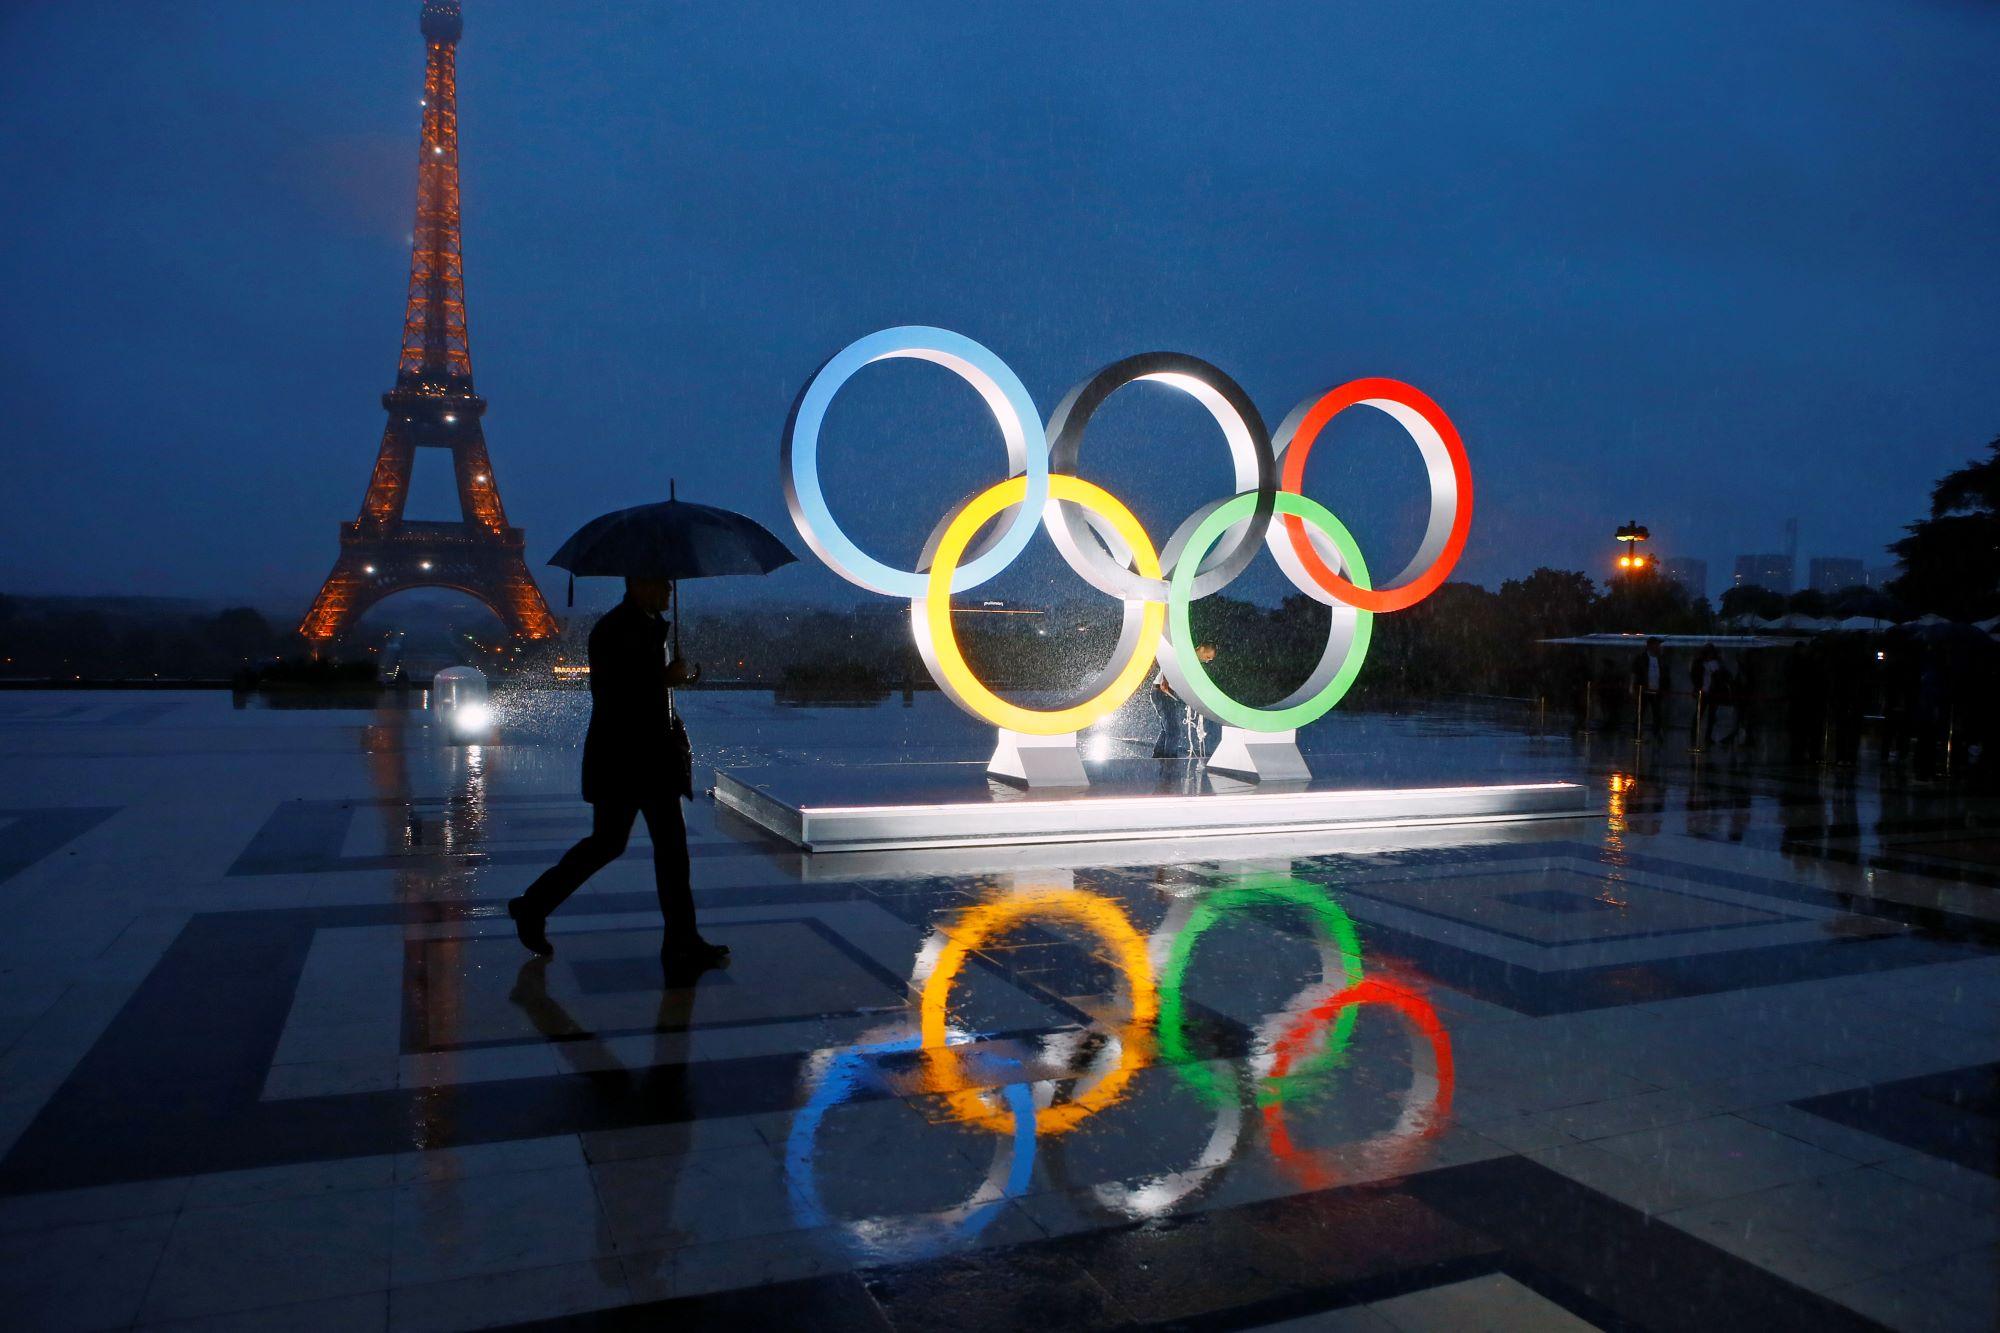 LA28 Board Proposes 5 New Sports for the 2028 Olympic Games